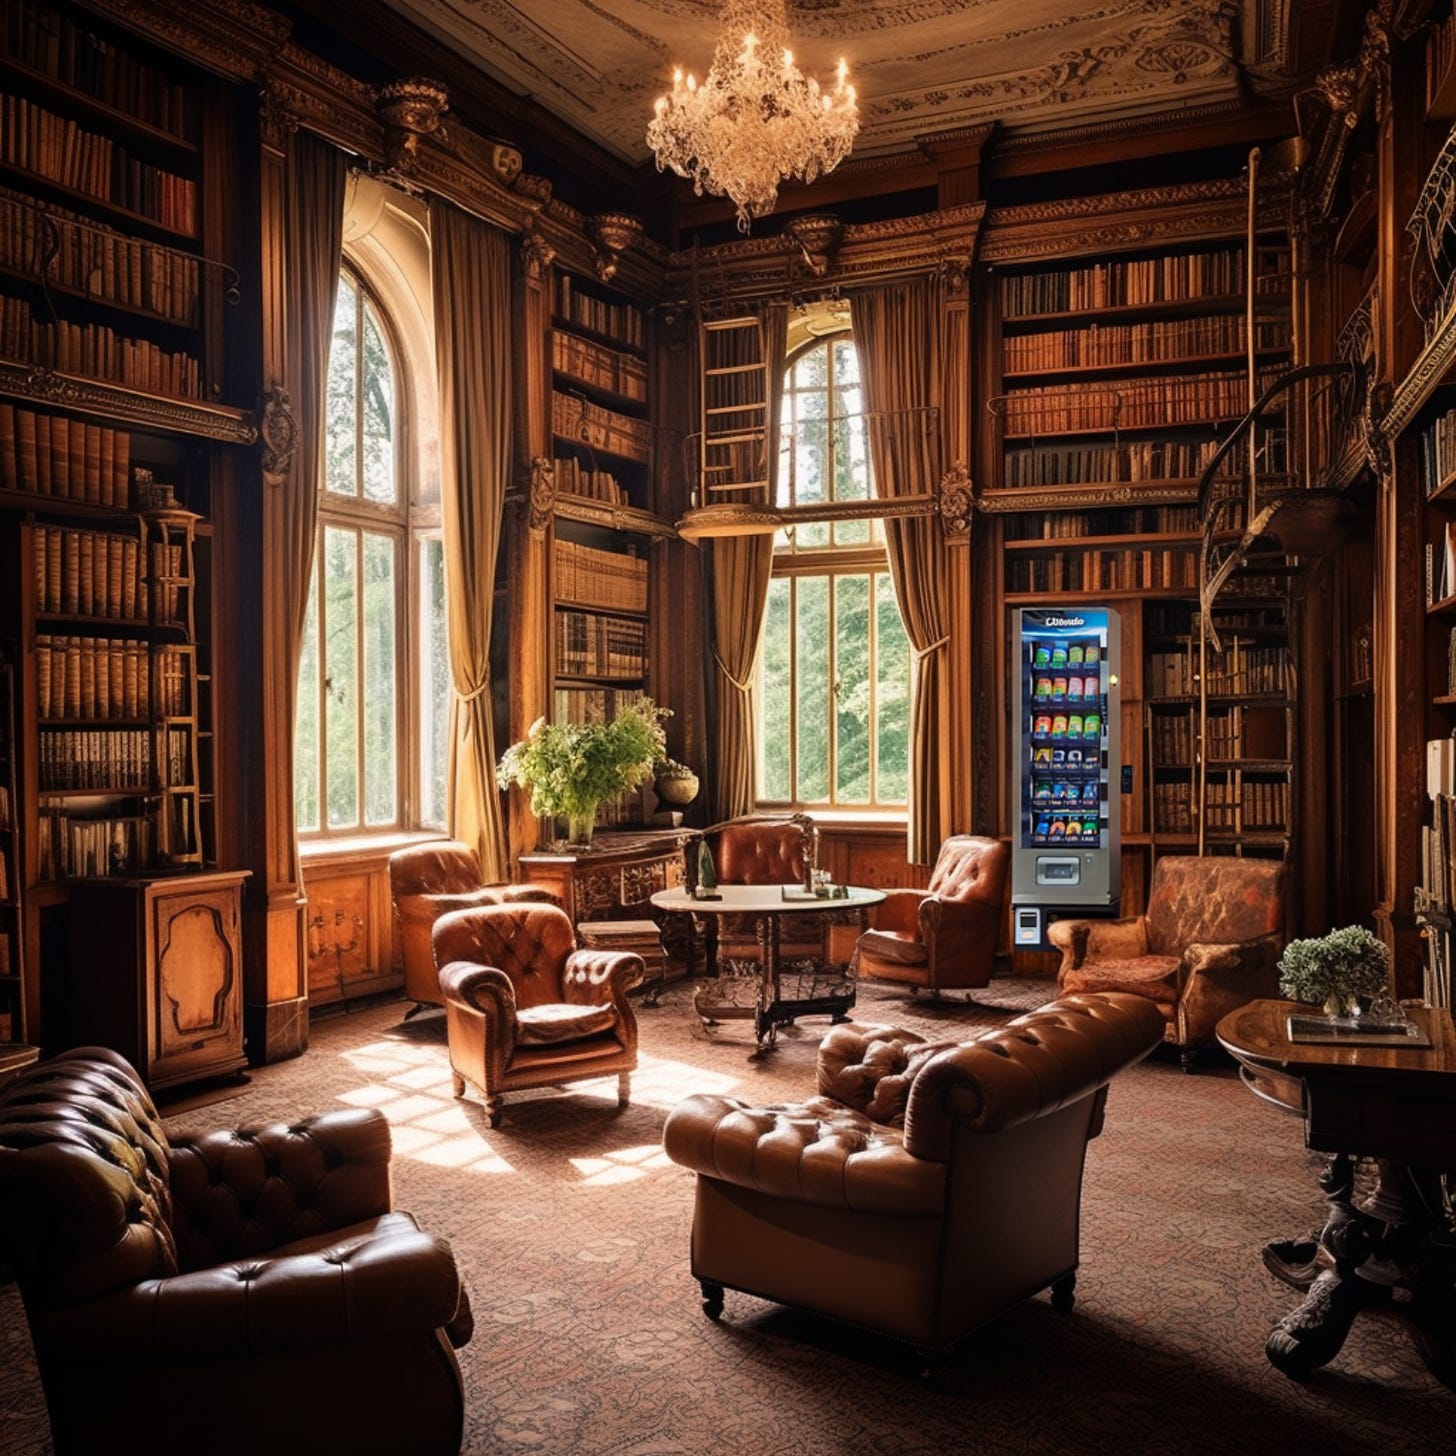 An oak-panelled library with a vending machine